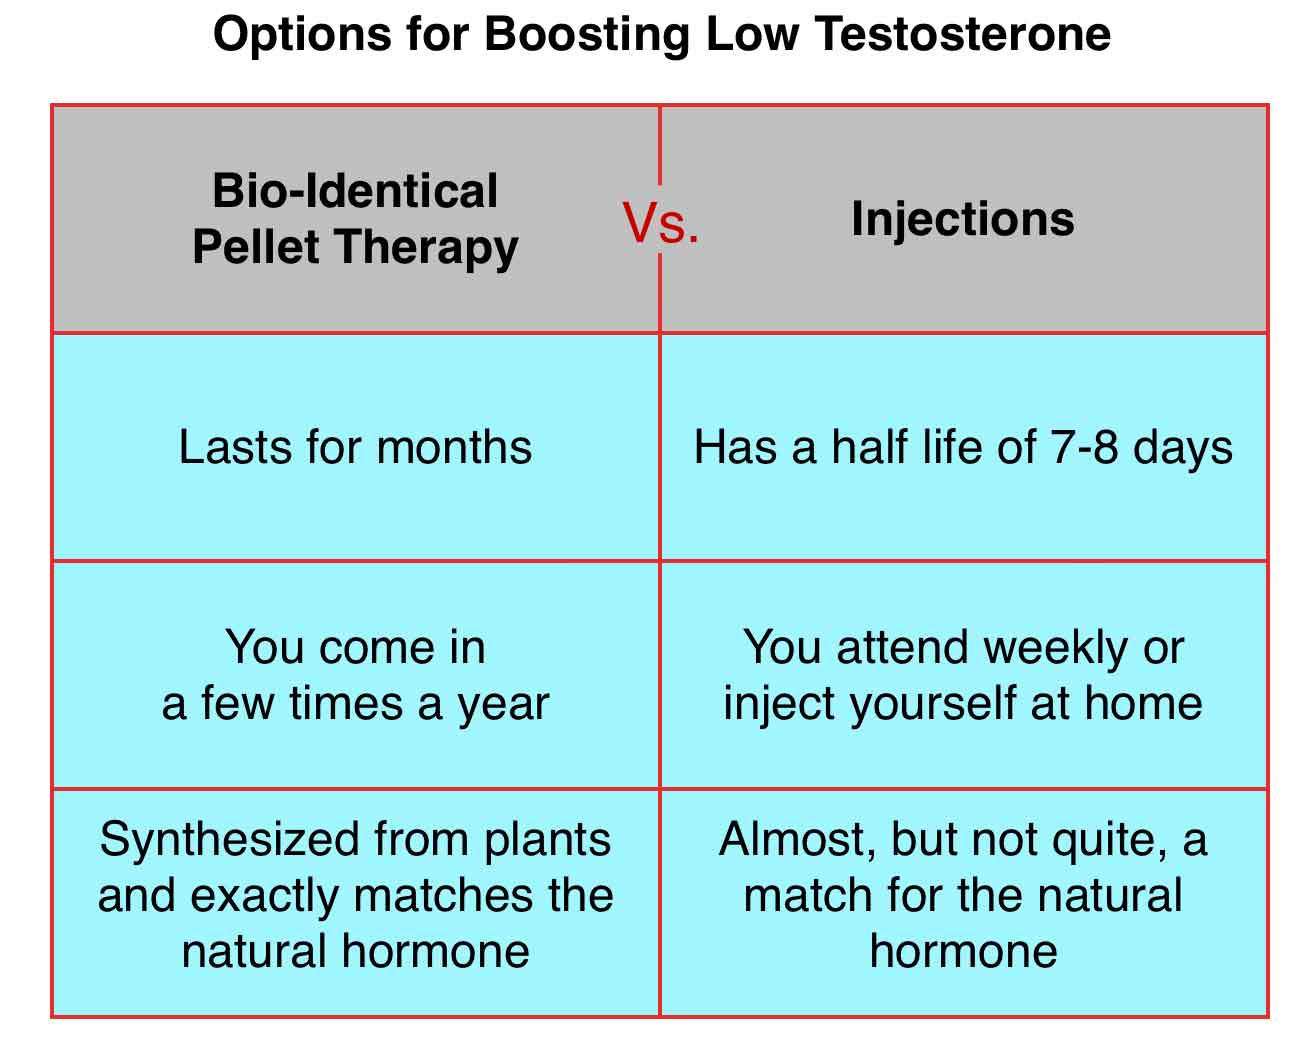 Chart showing bioidentical pellet therapy features versus testosterone injections